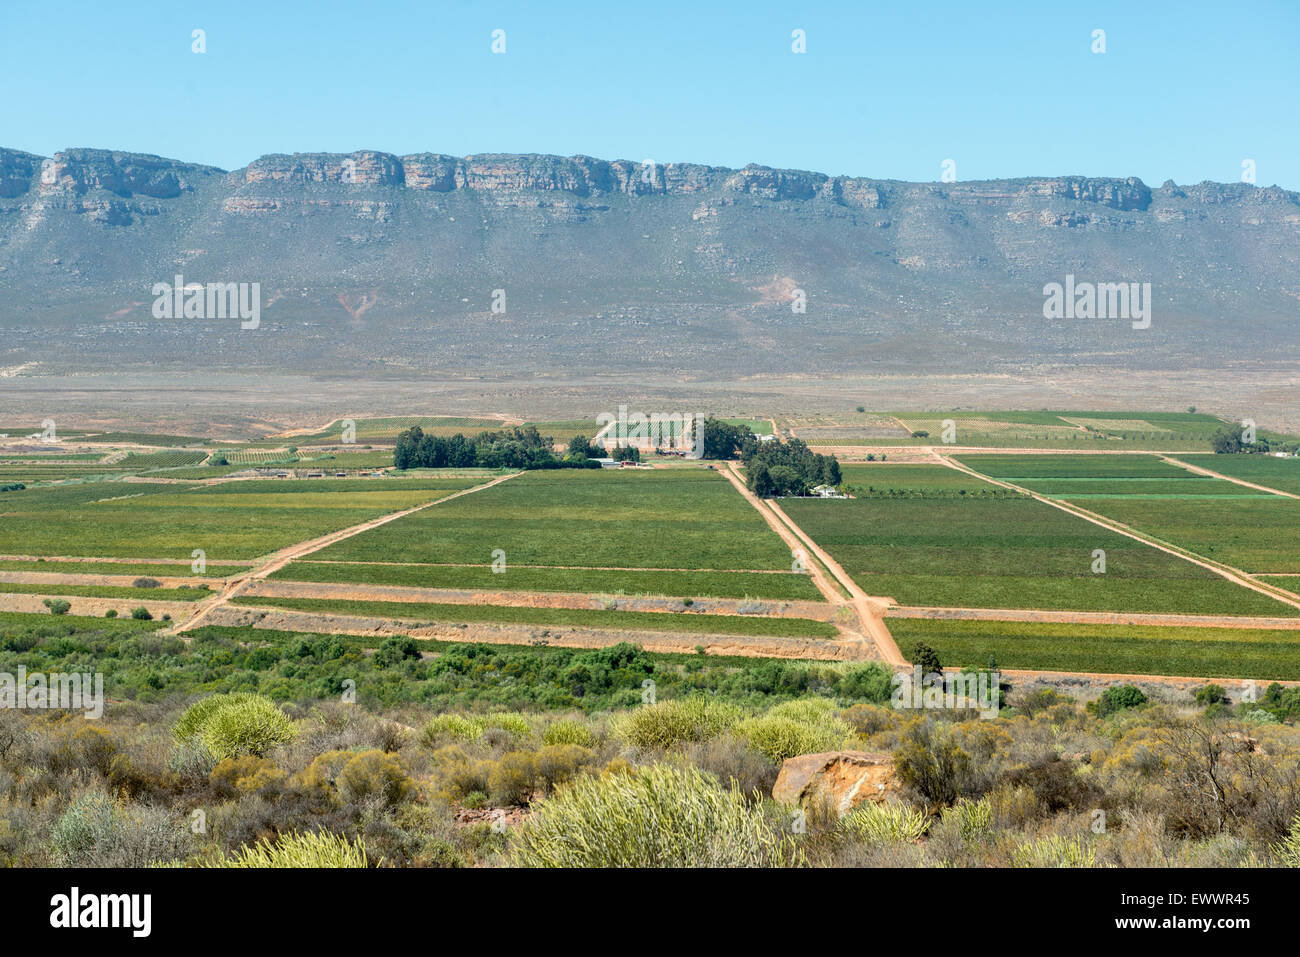 South Africa - Aerial view of agricultural landscape Stock Photo